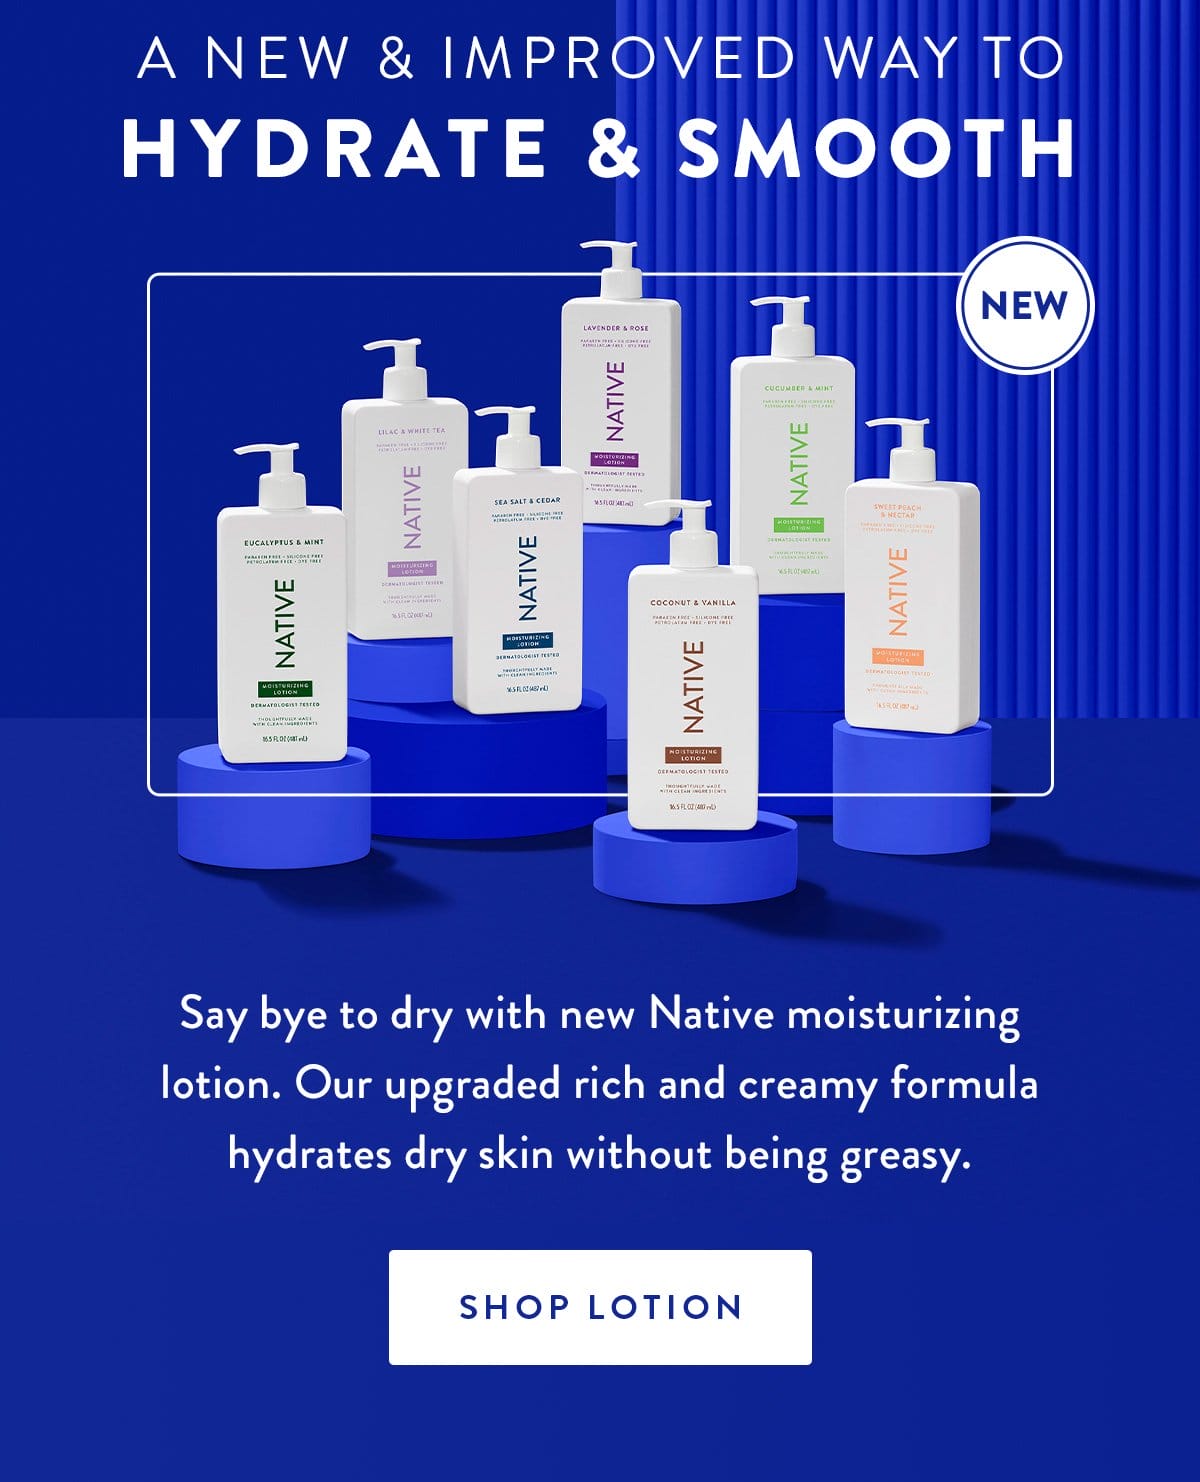 A New & Improved Way to Hydrate & Smooth | Say bye to dry with new Native moisturizing lotion. Our upgraded rich and creamy formula hydrates dry skin without being greasy. | SHOP LOTION